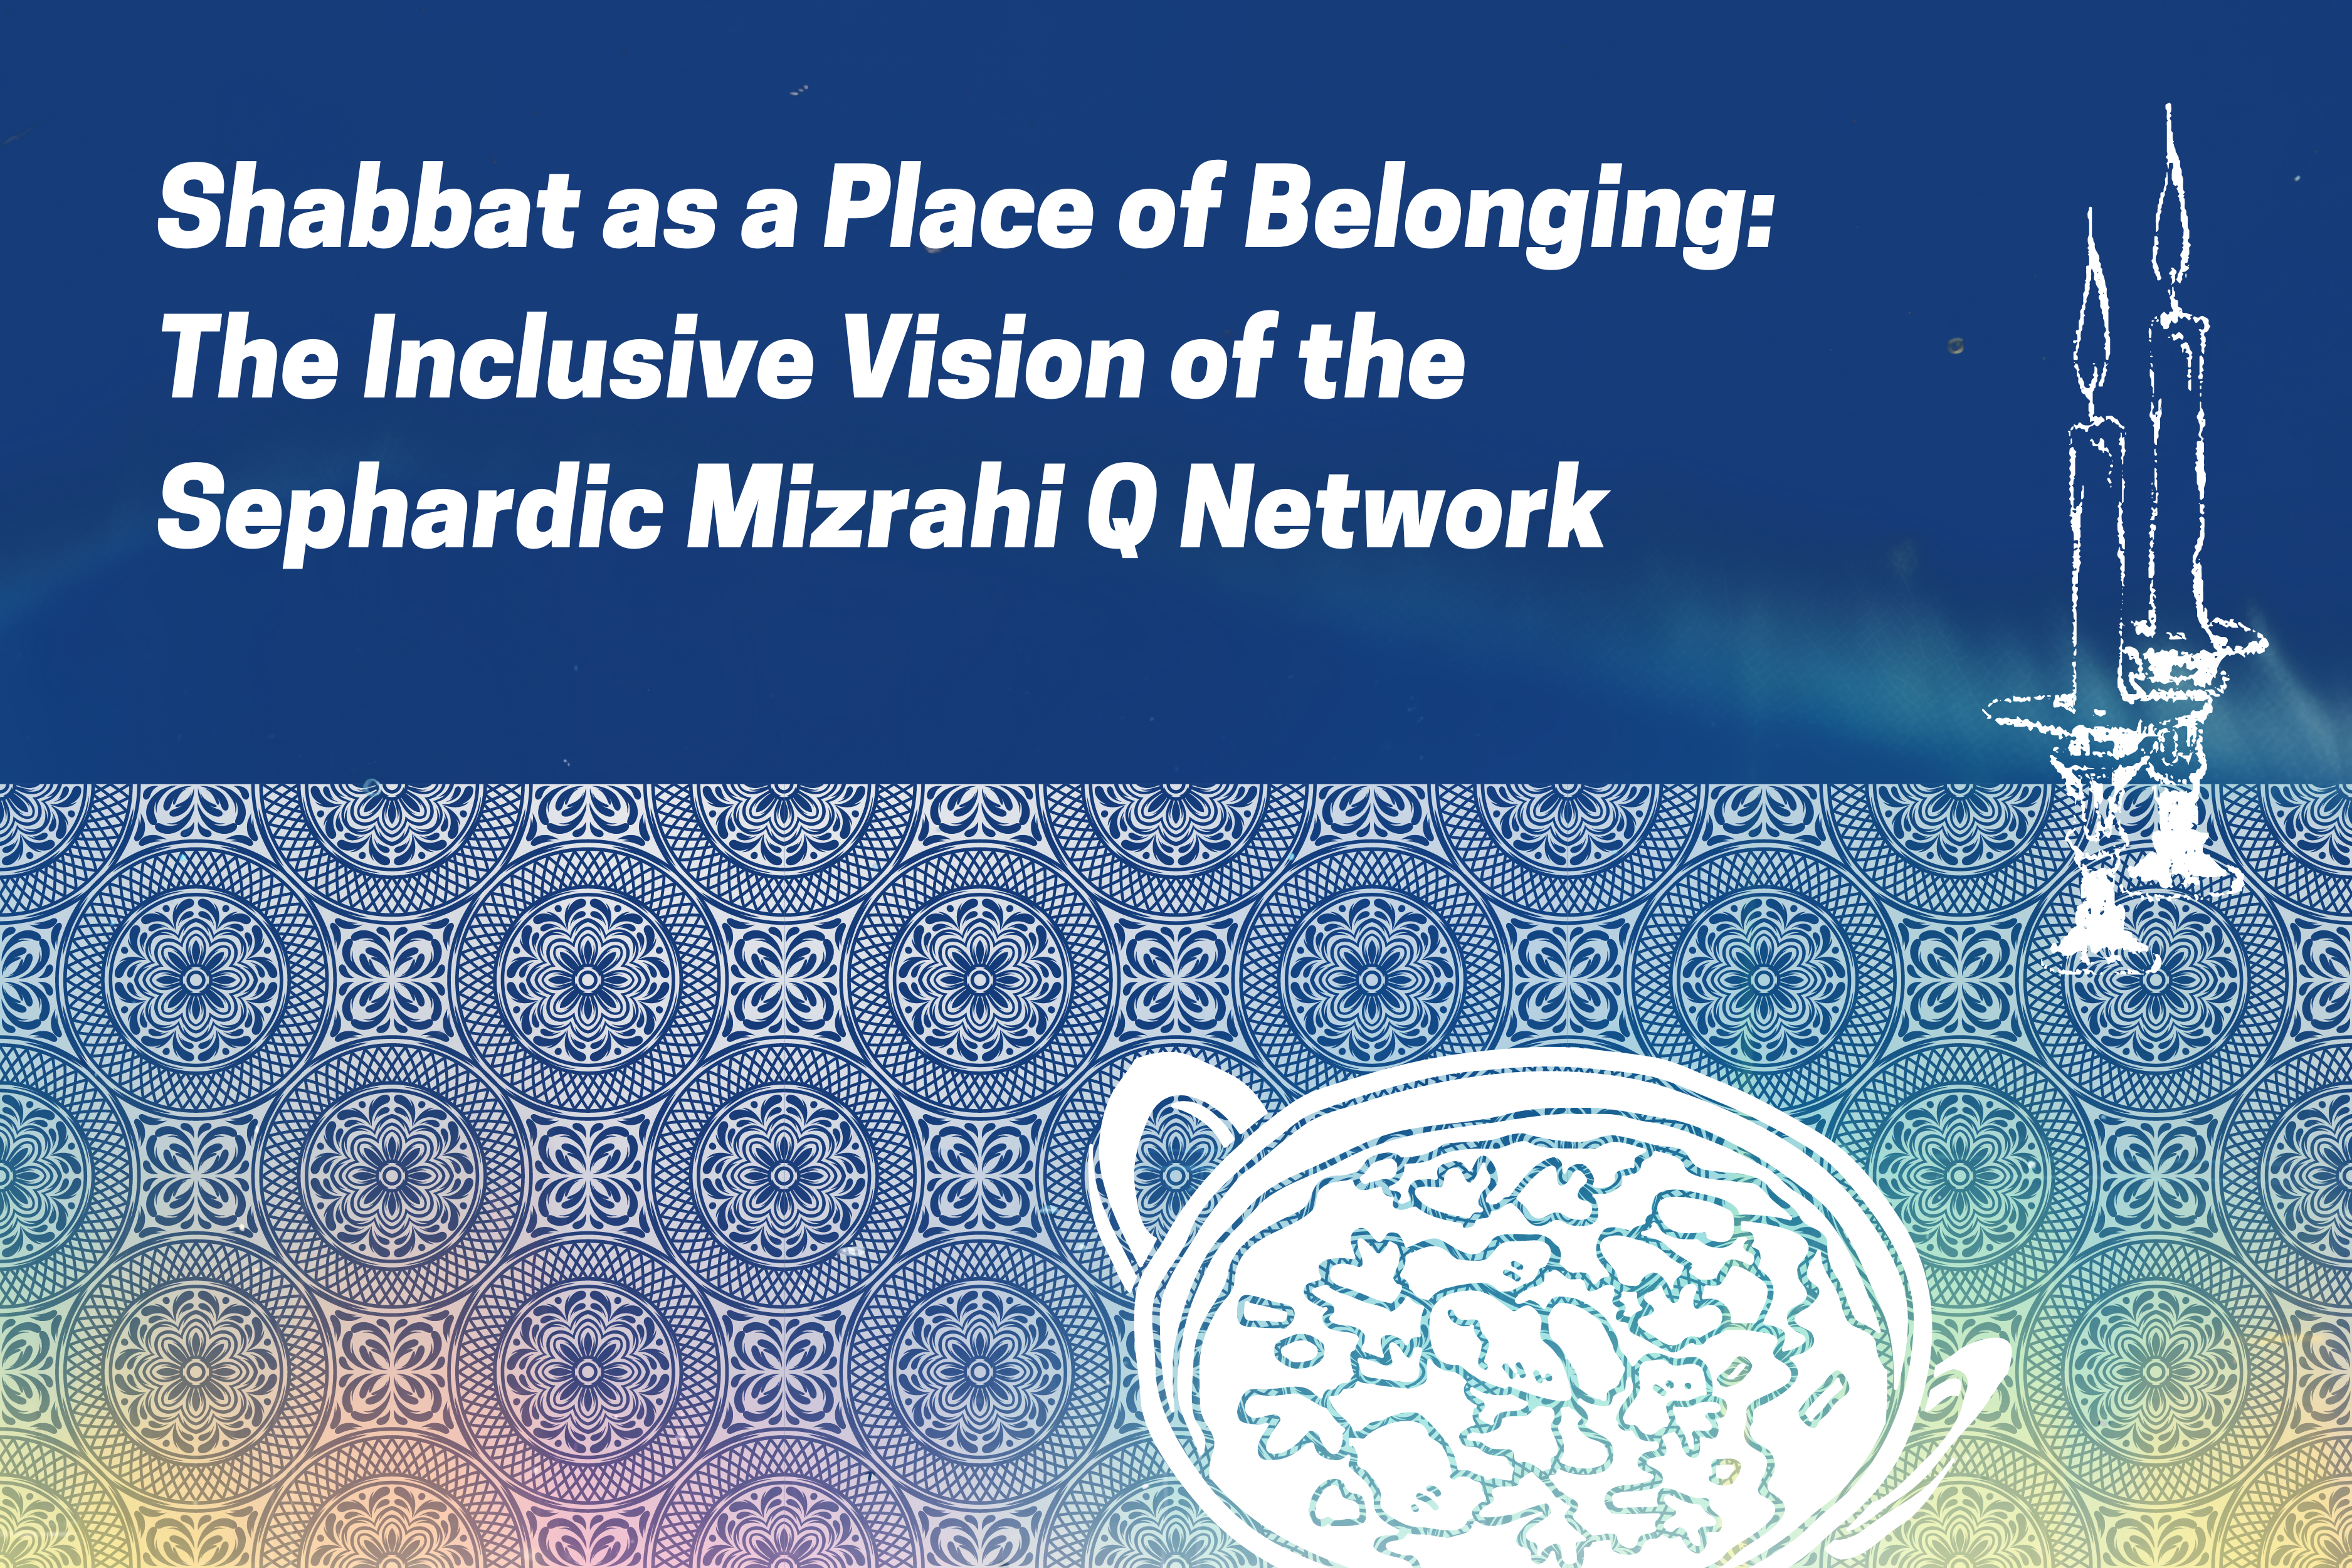 Shabbat as a Place of Belonging: The Inclusive Vision of the Sephardic Mizrahi Q Network